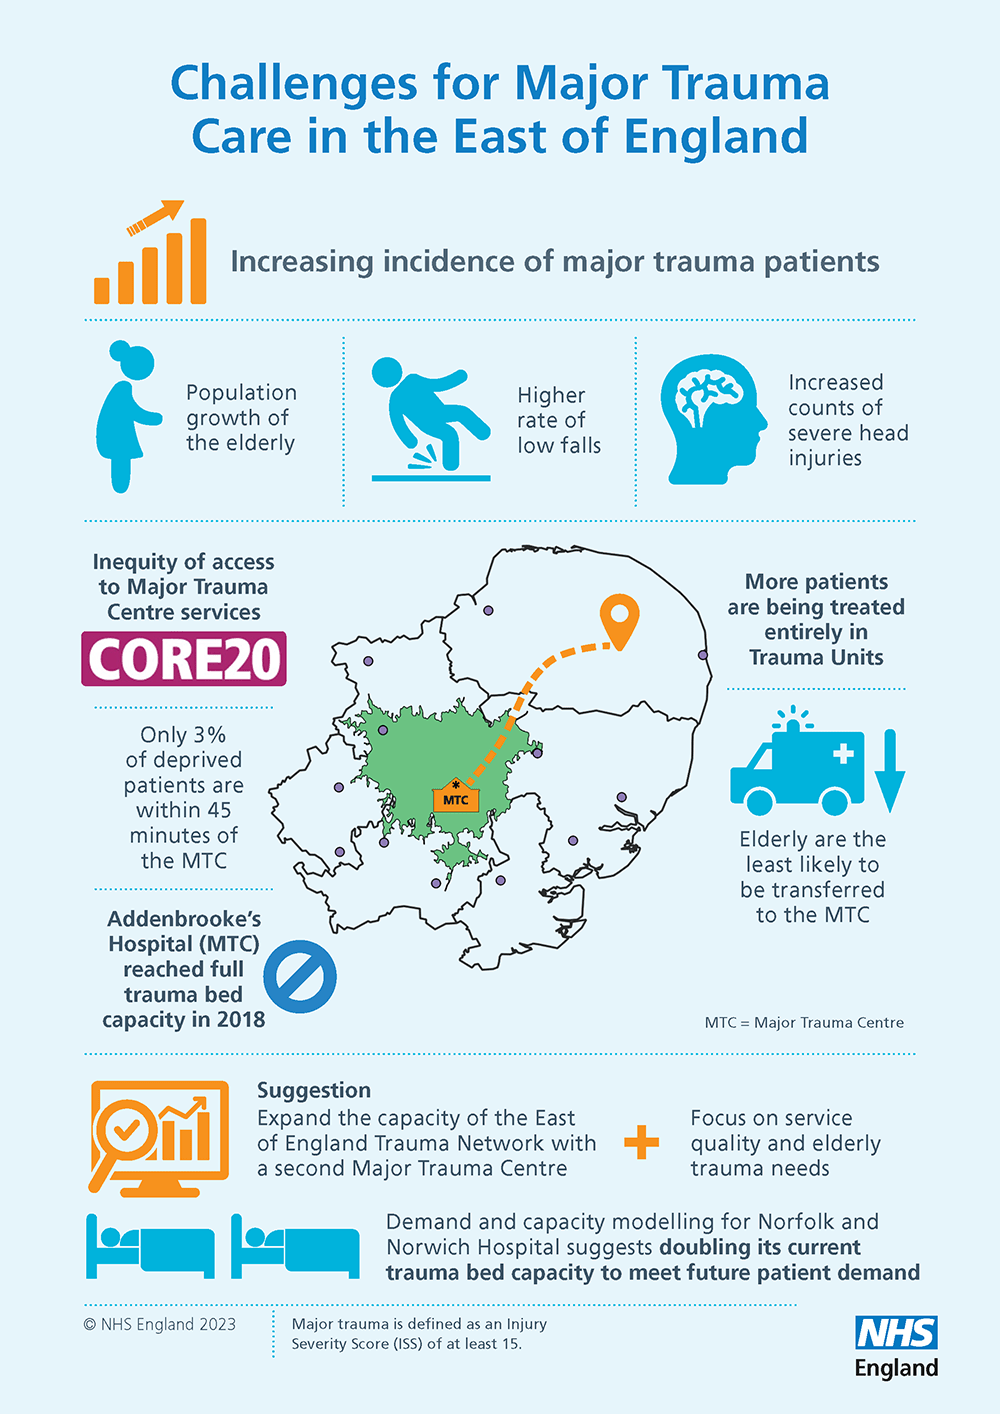 Graphic of statistics that demonstrate the challenges involved in major trauma care, such as the population growth of the elderly and a higher rate of low falls.